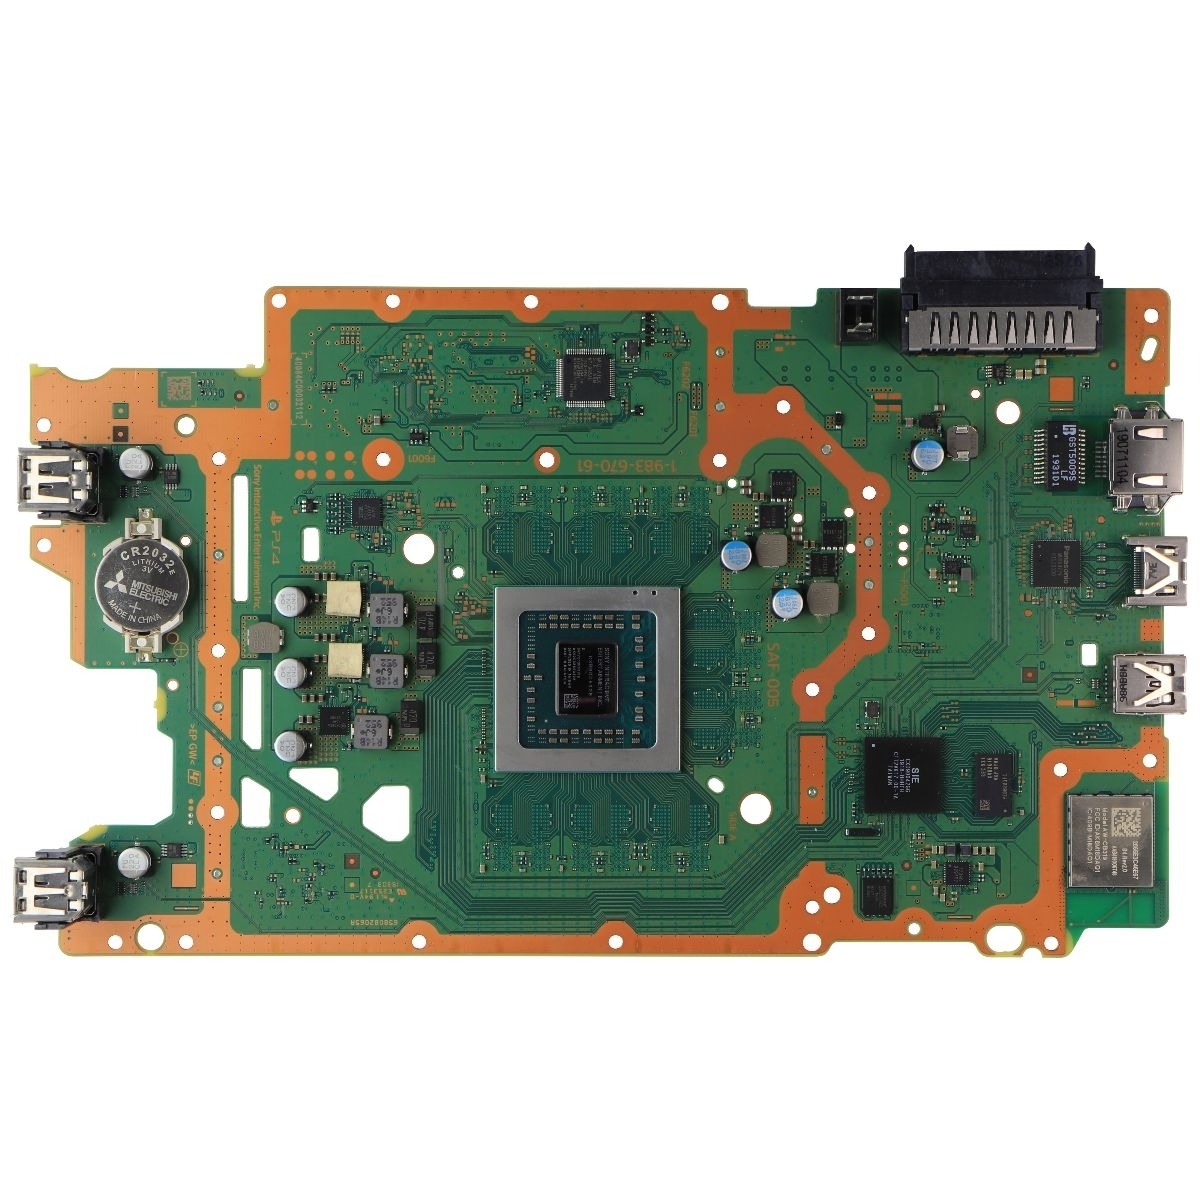 Sony Playstation 4 Slim OEM Replacement Motherboard (SAF-005) For CUH-2215B/2115 (Refurbished)